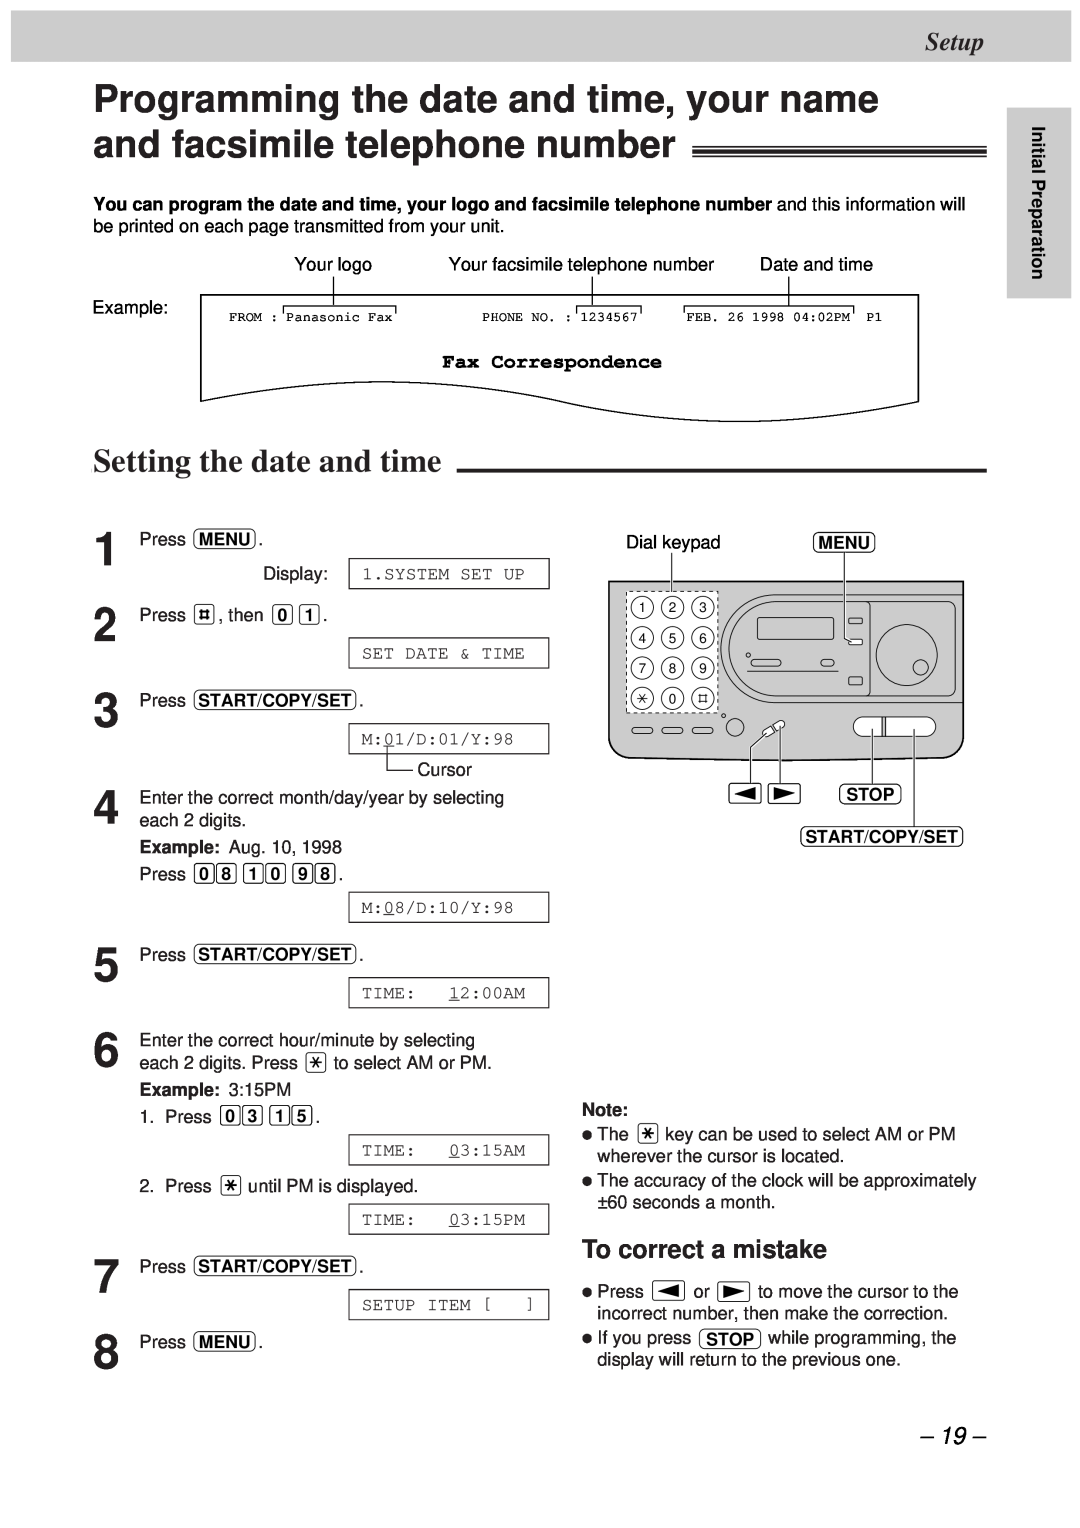 Panasonic KX-FT34HK, KX-FT33HK quick start Setting the date and time, To correct a mistake, Setup, Fax Correspondence 